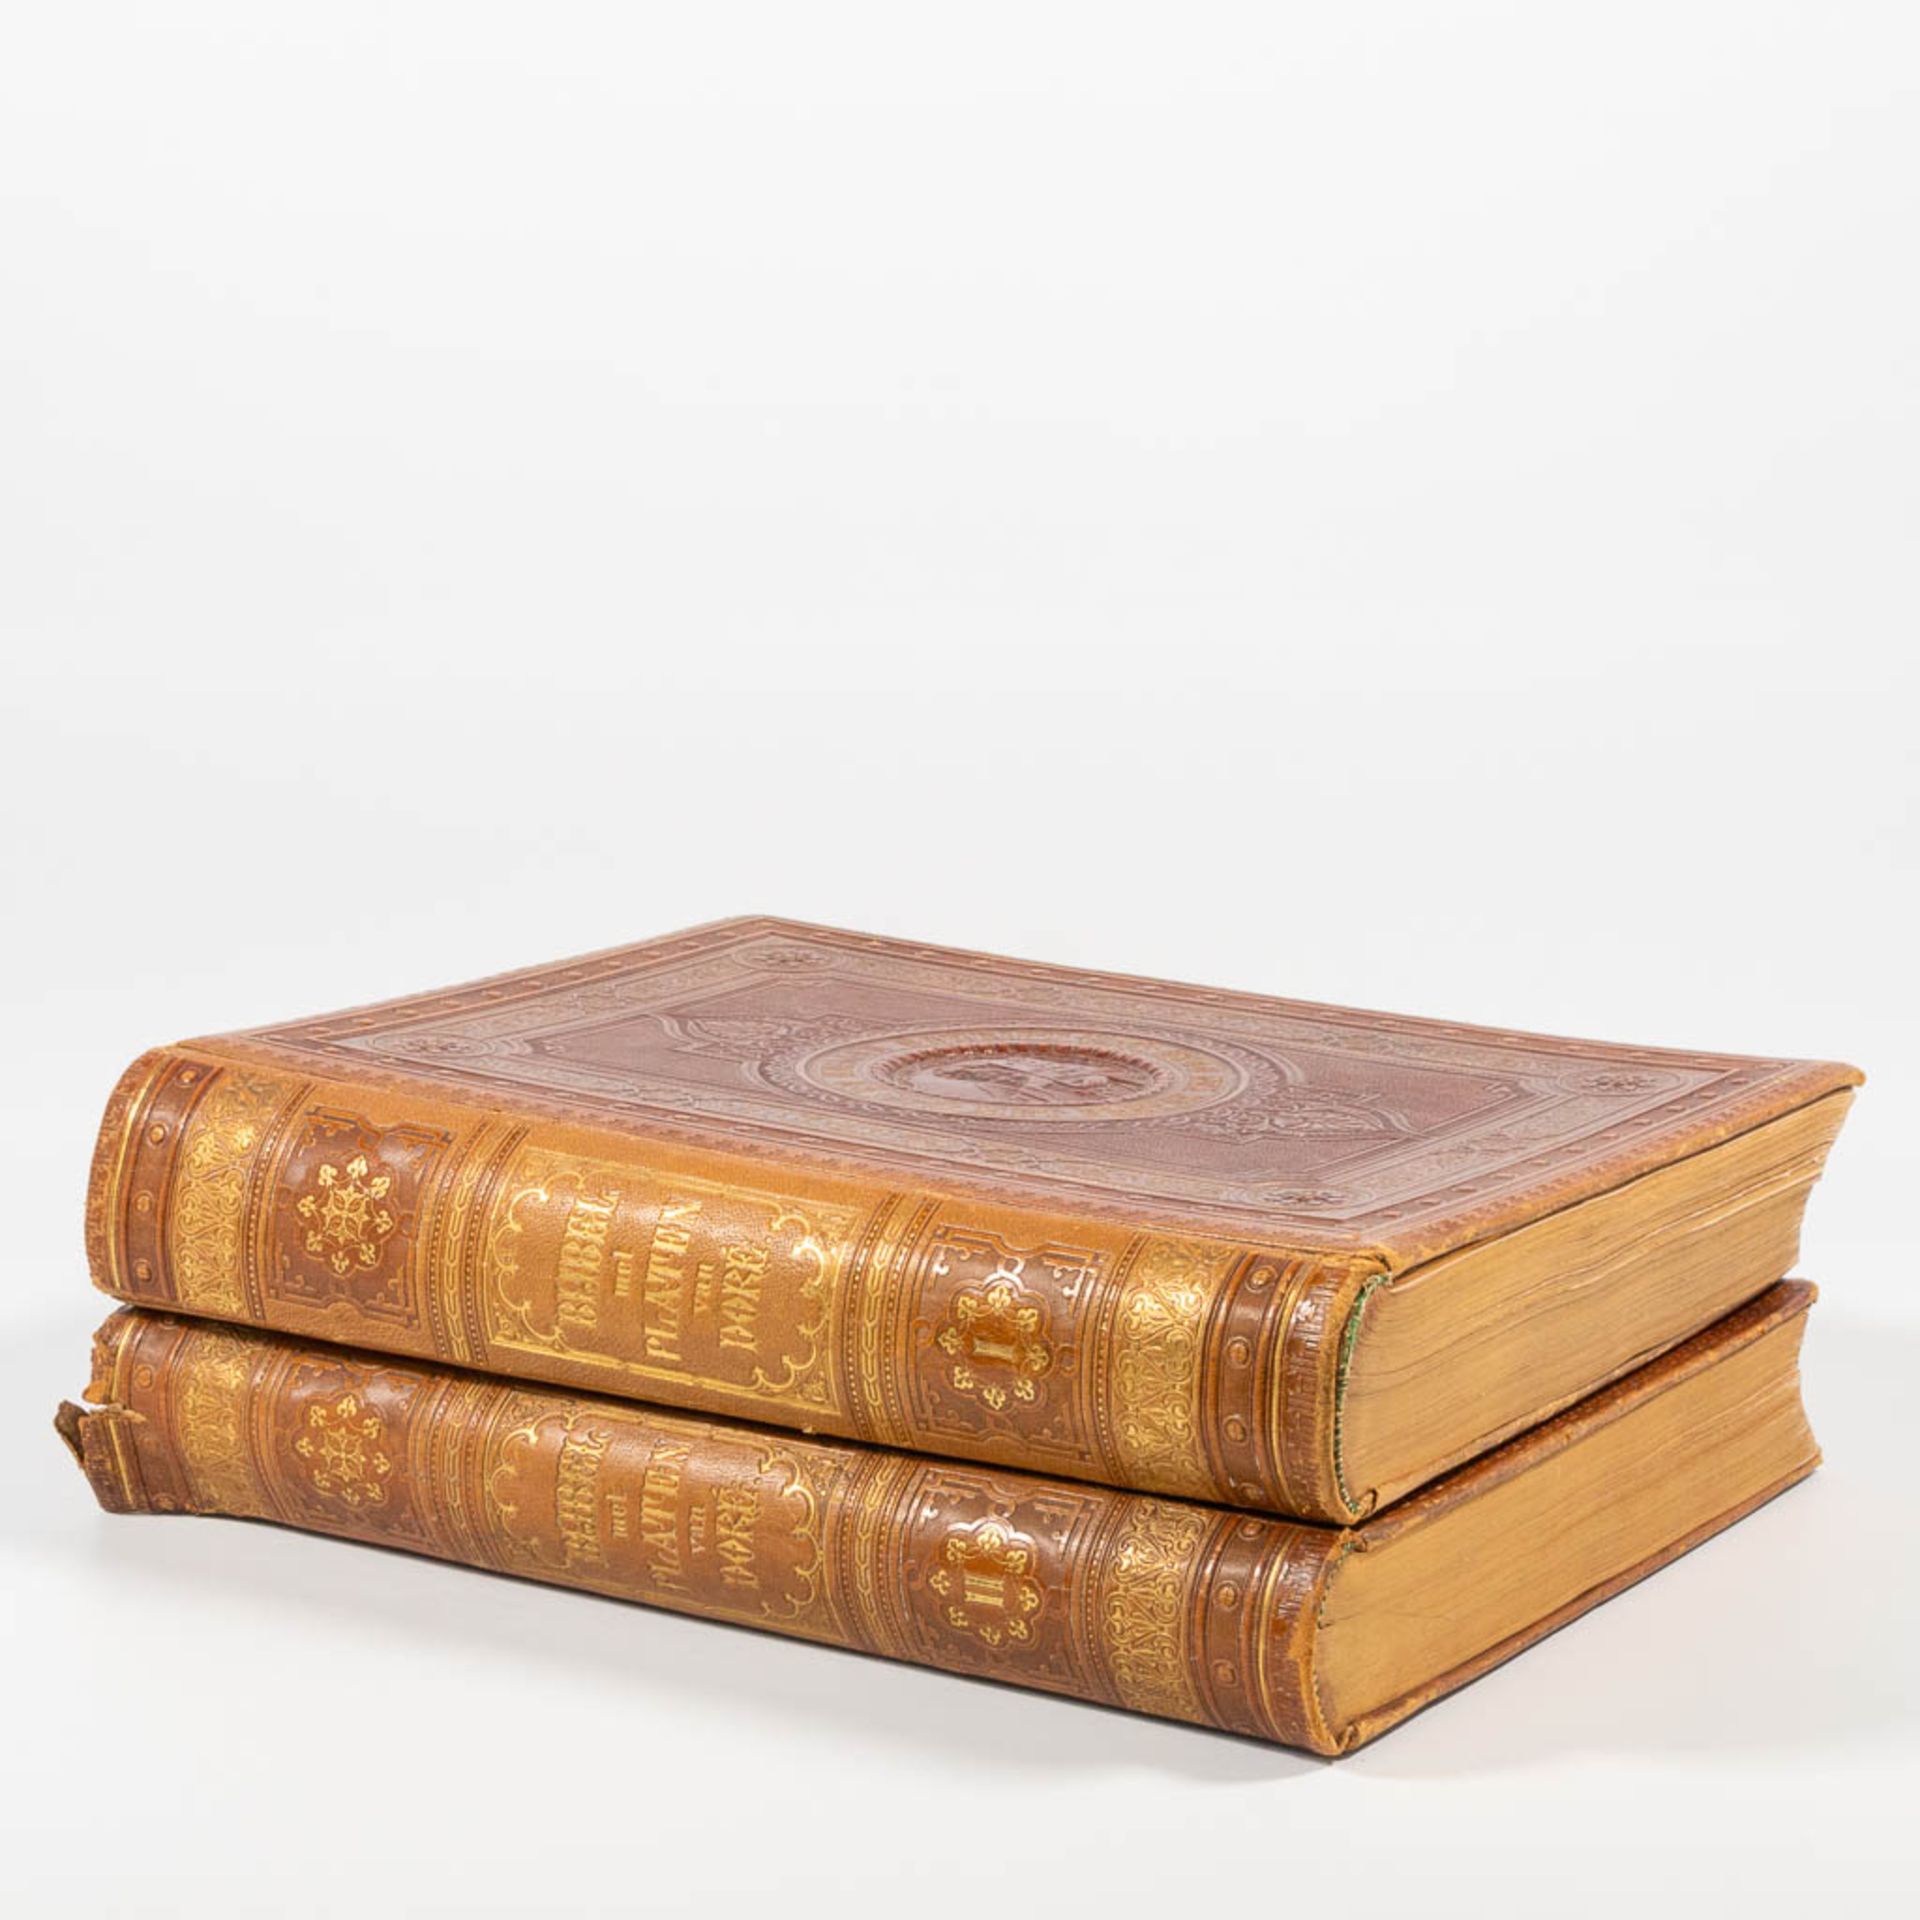 A pair of bibles 'The holy writing', the old and new testament, with 200 images by Gustave Doré.